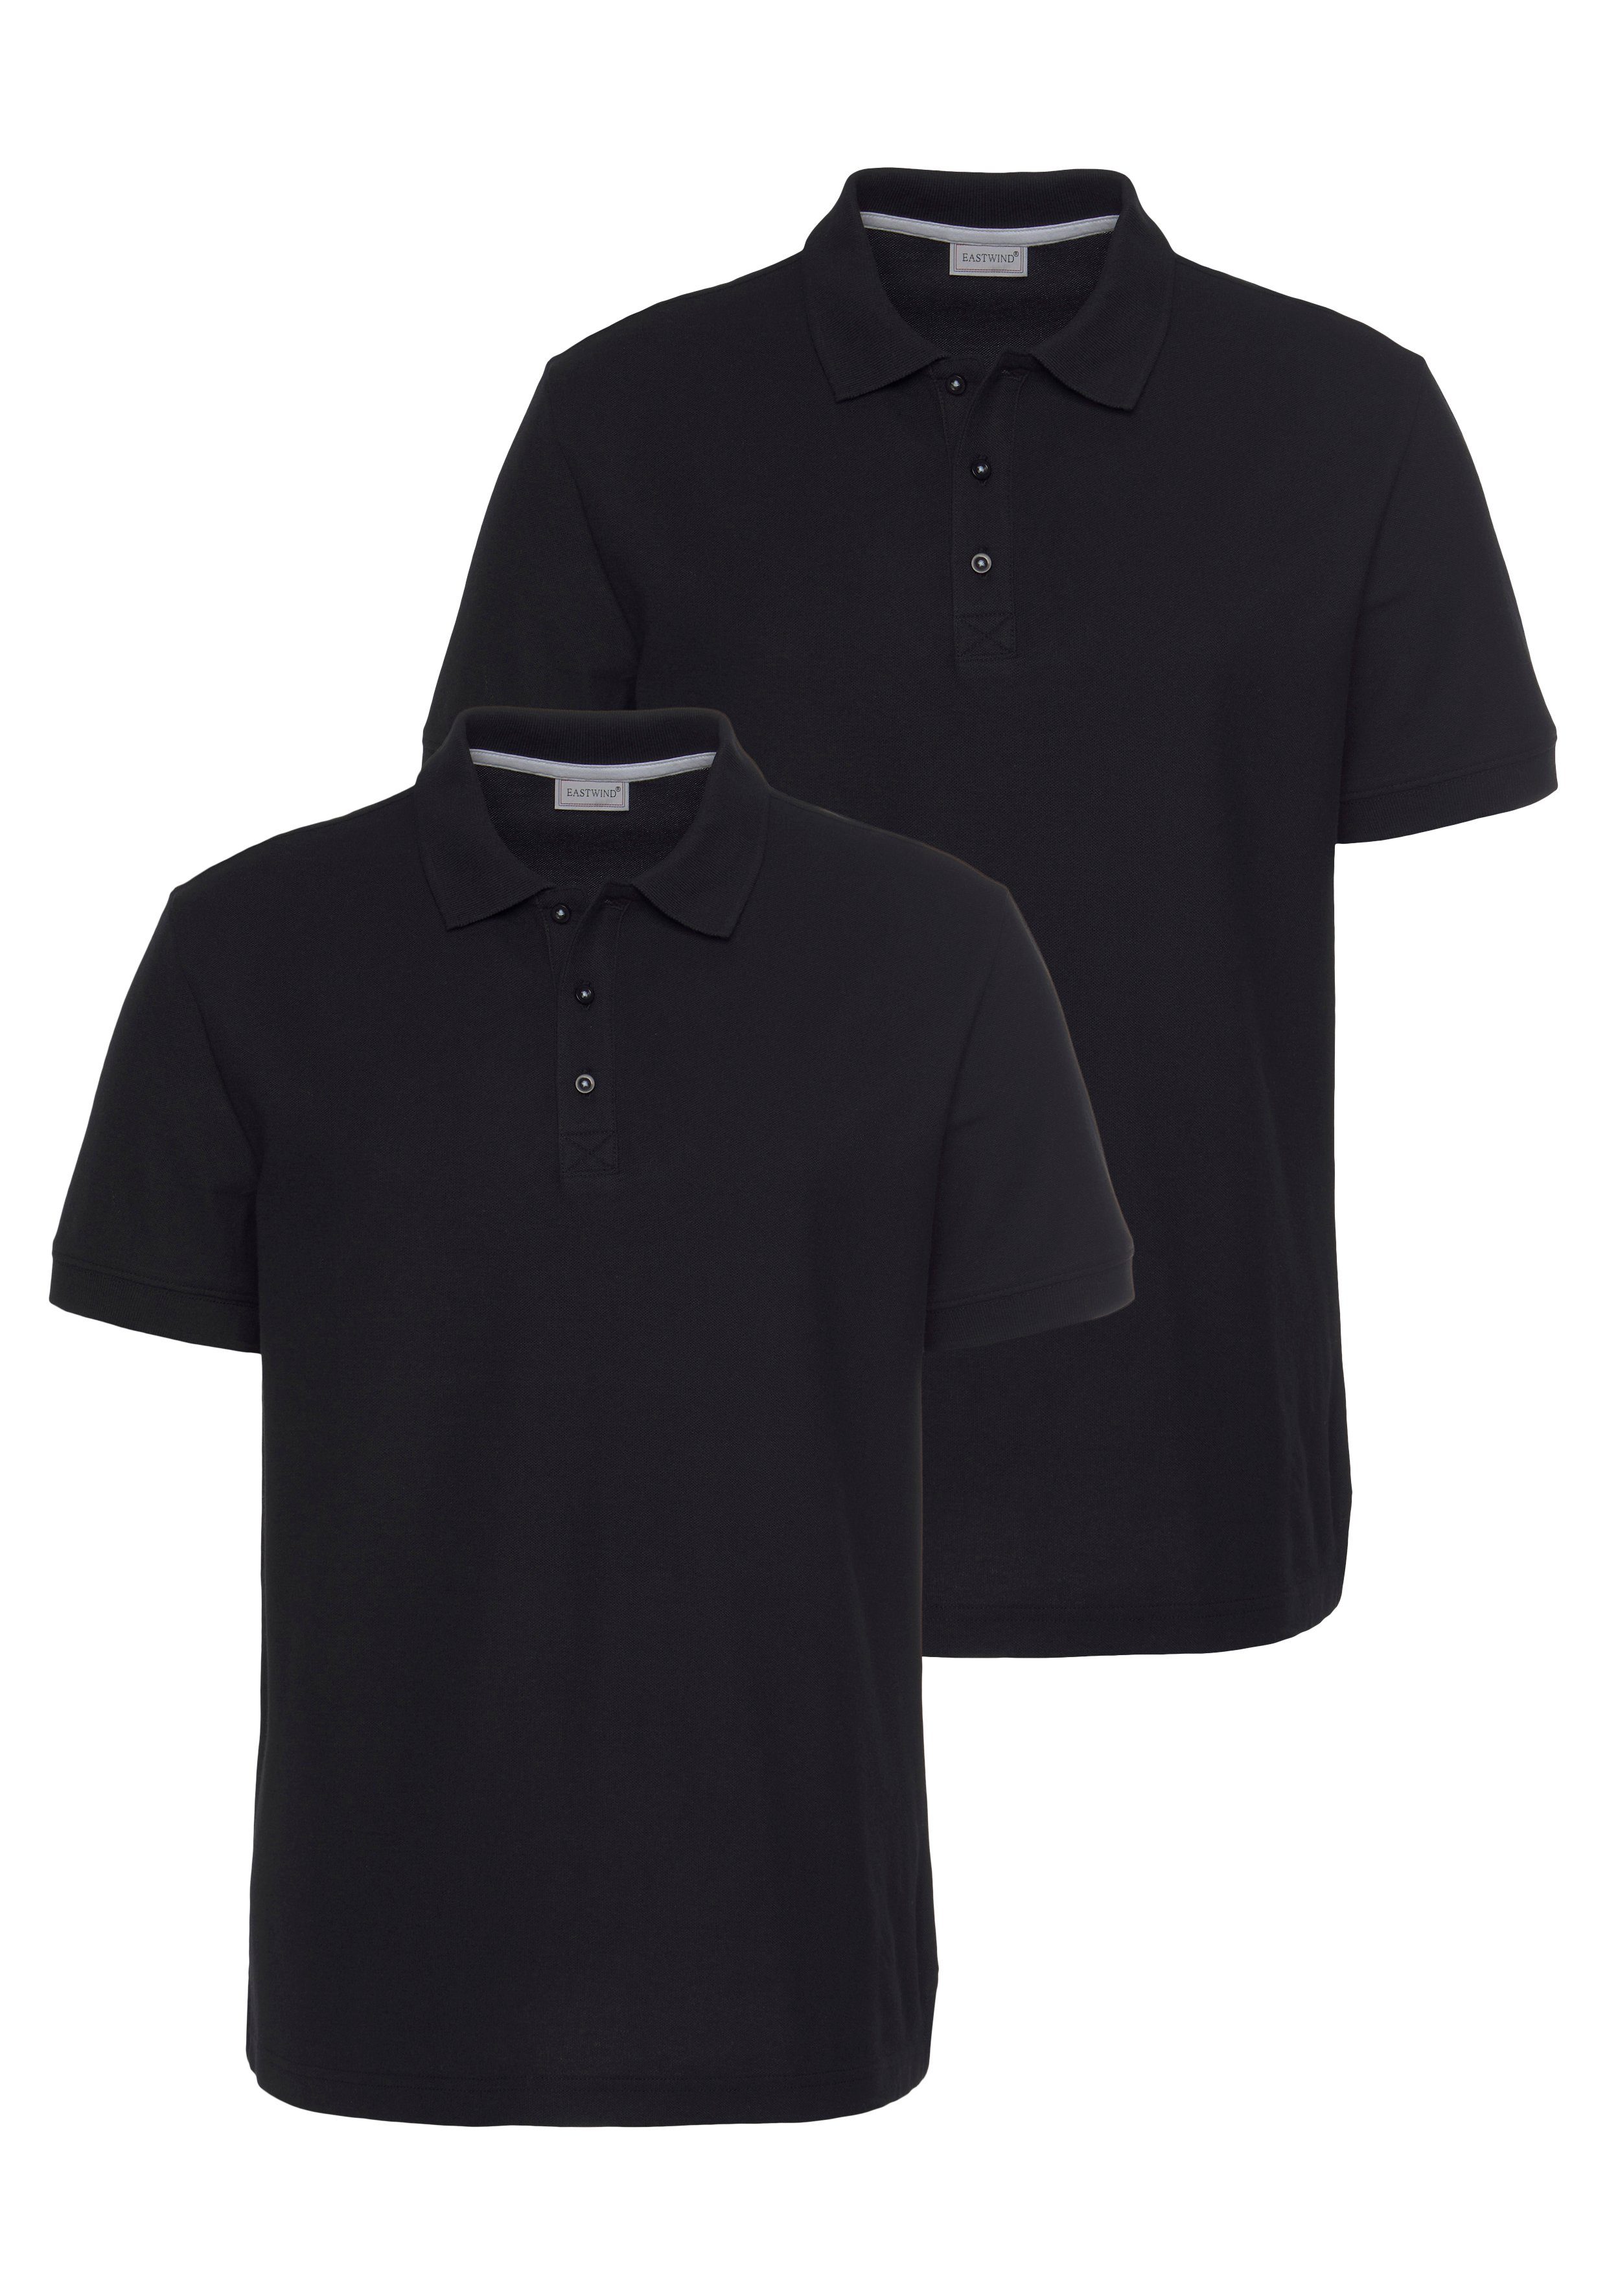 Eastwind Poloshirt Double Polo, (2er-Pack) navy+white schwarz Pack